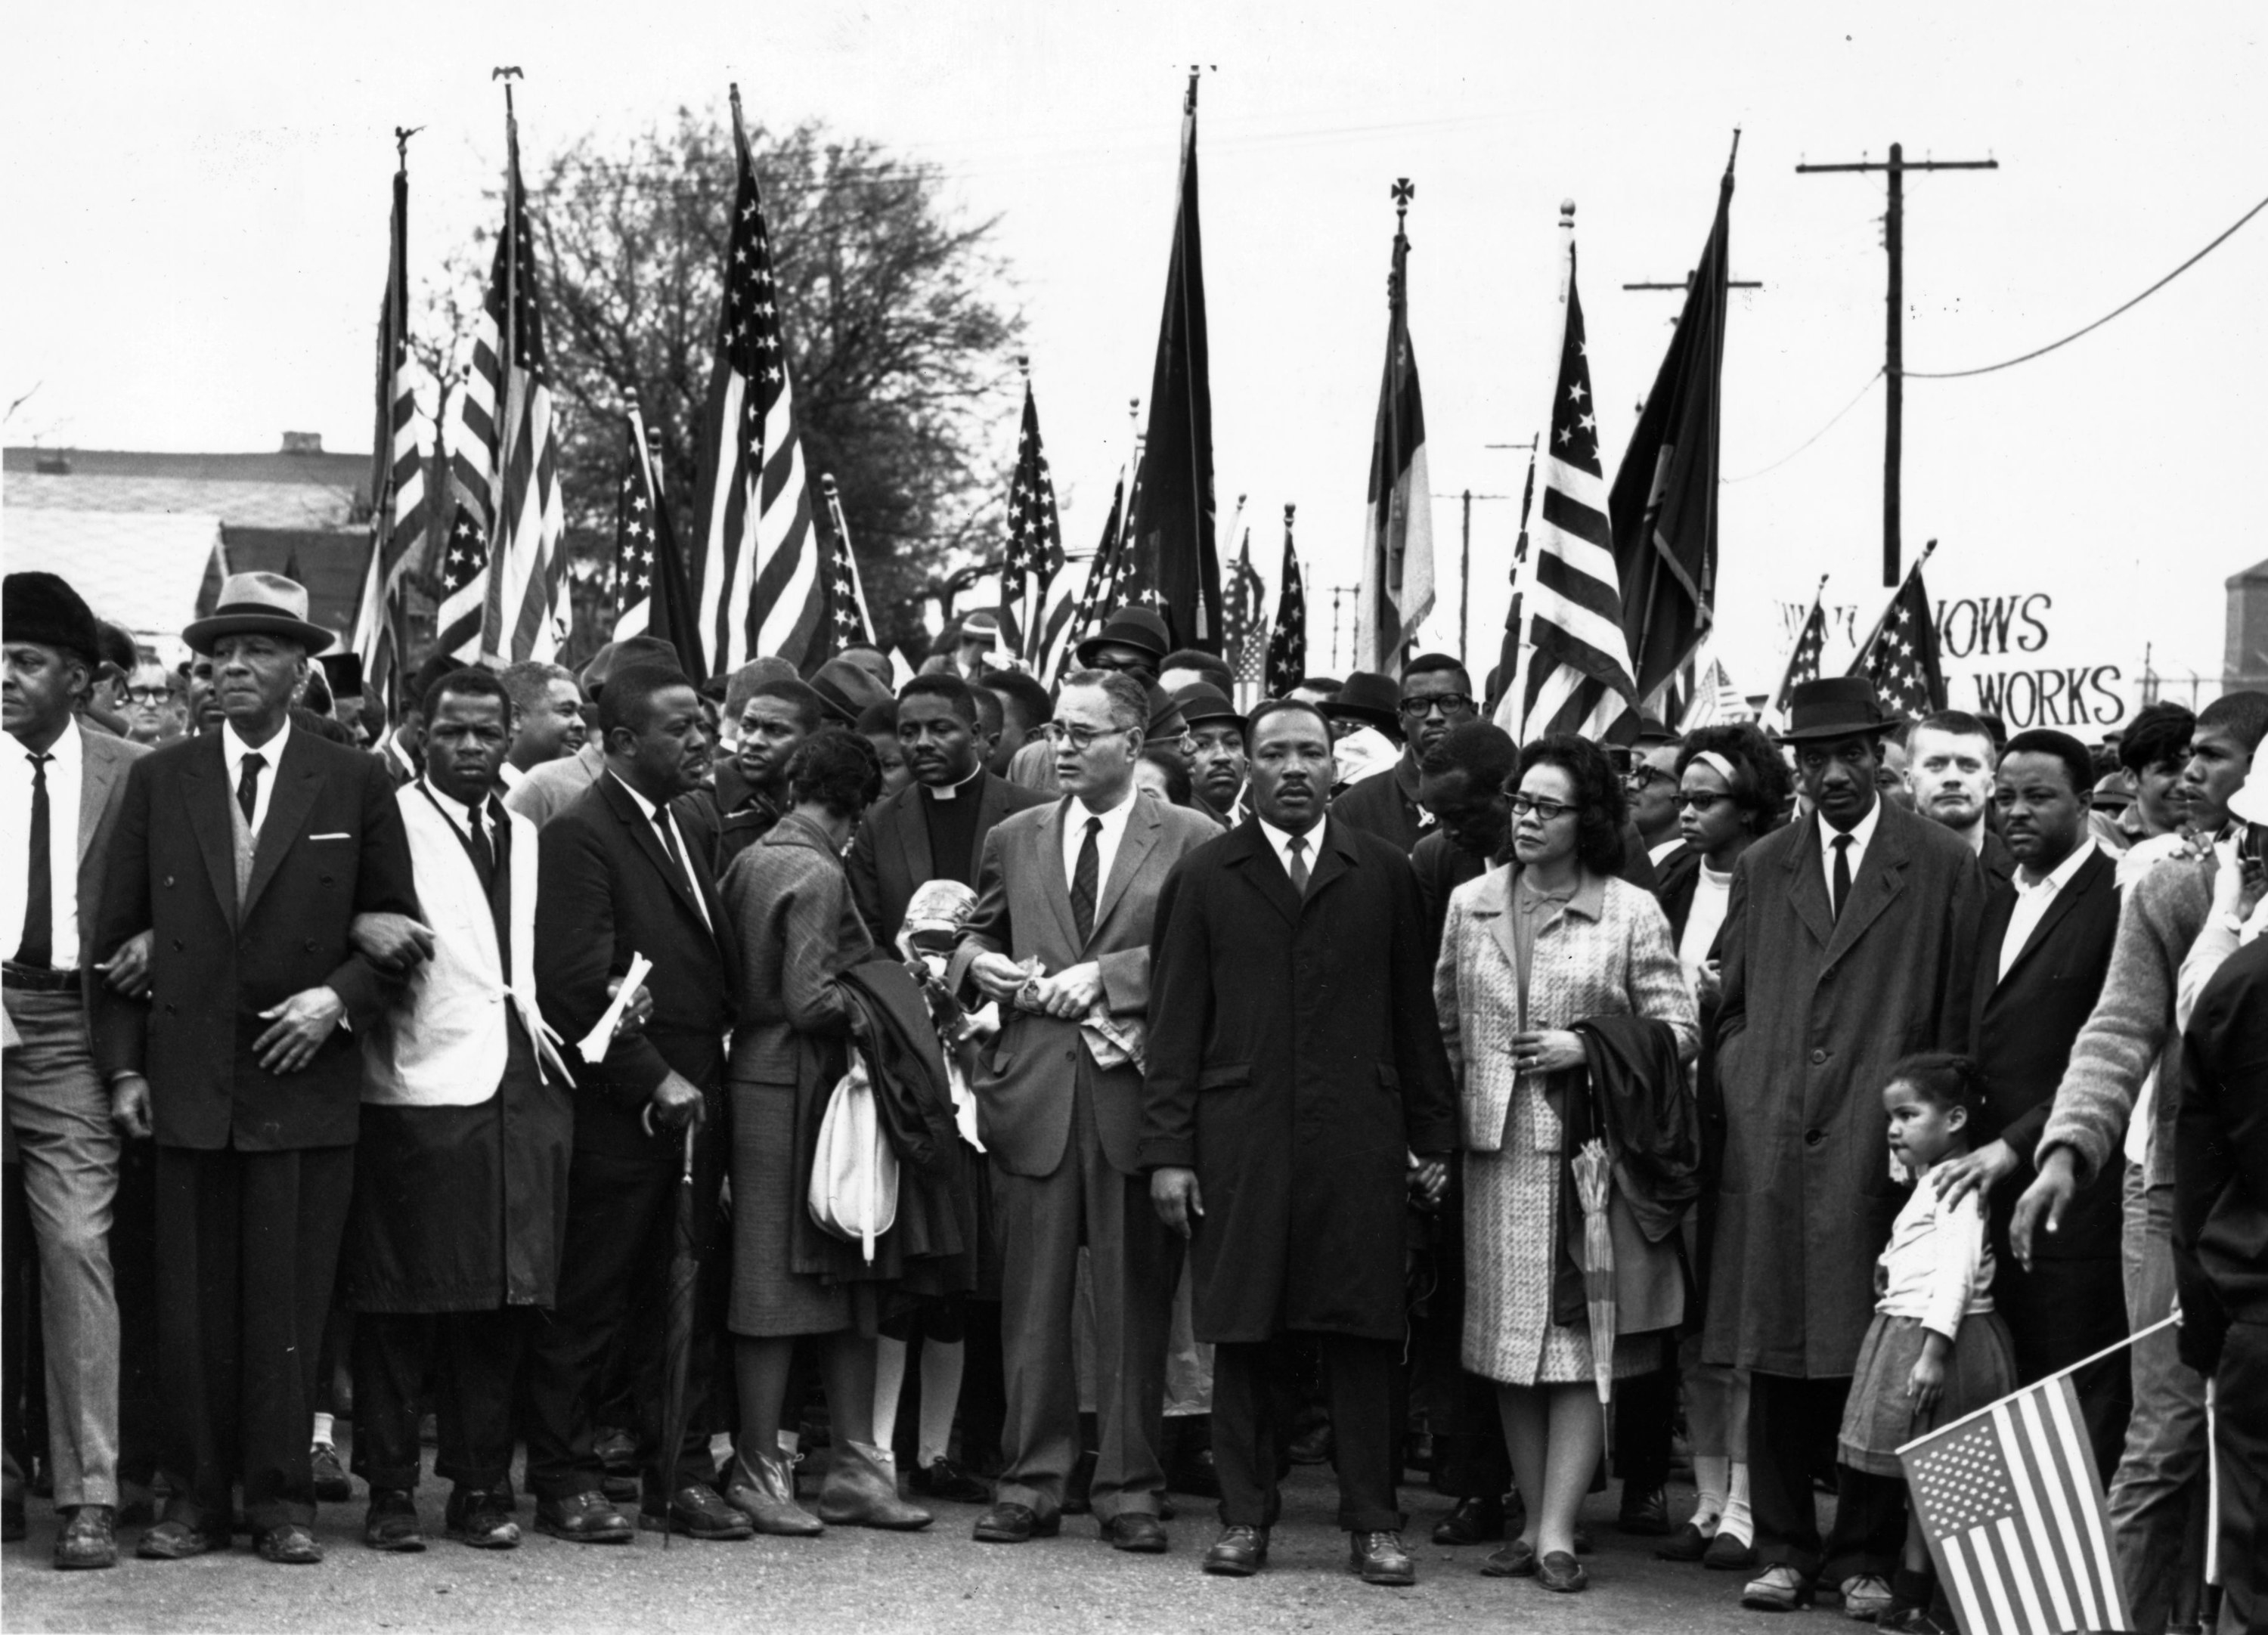 Dr. King with civil rights activists